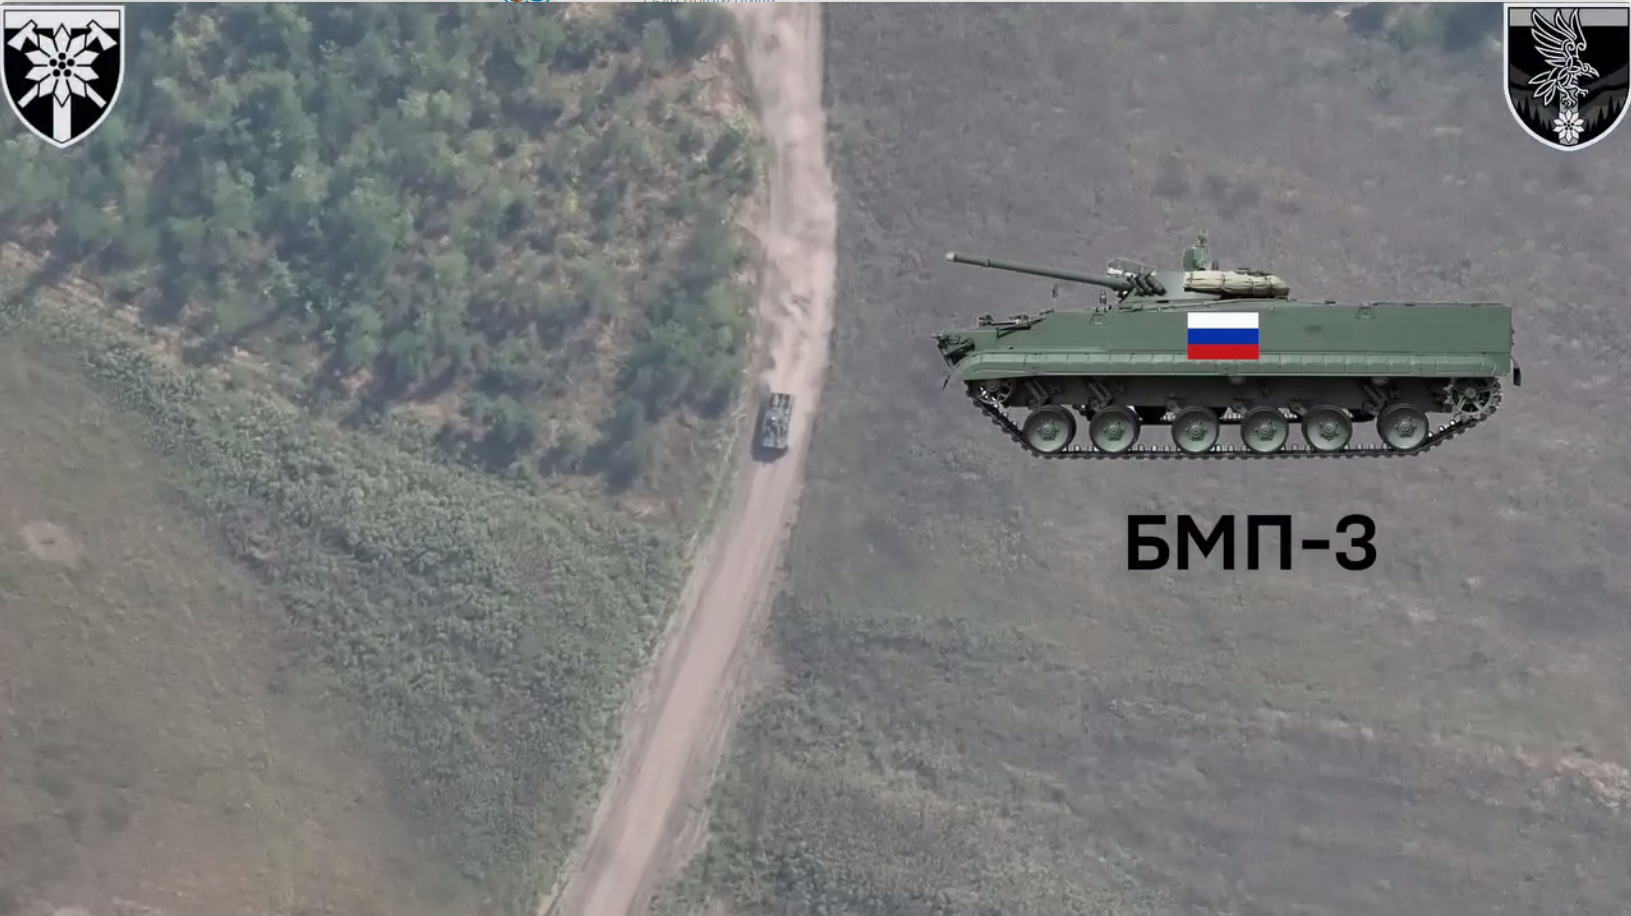 Right on target: Ukrainian soldiers hit a Russian BMP-3 with a kamikaze drone, which was moving at full speed on the road. Video